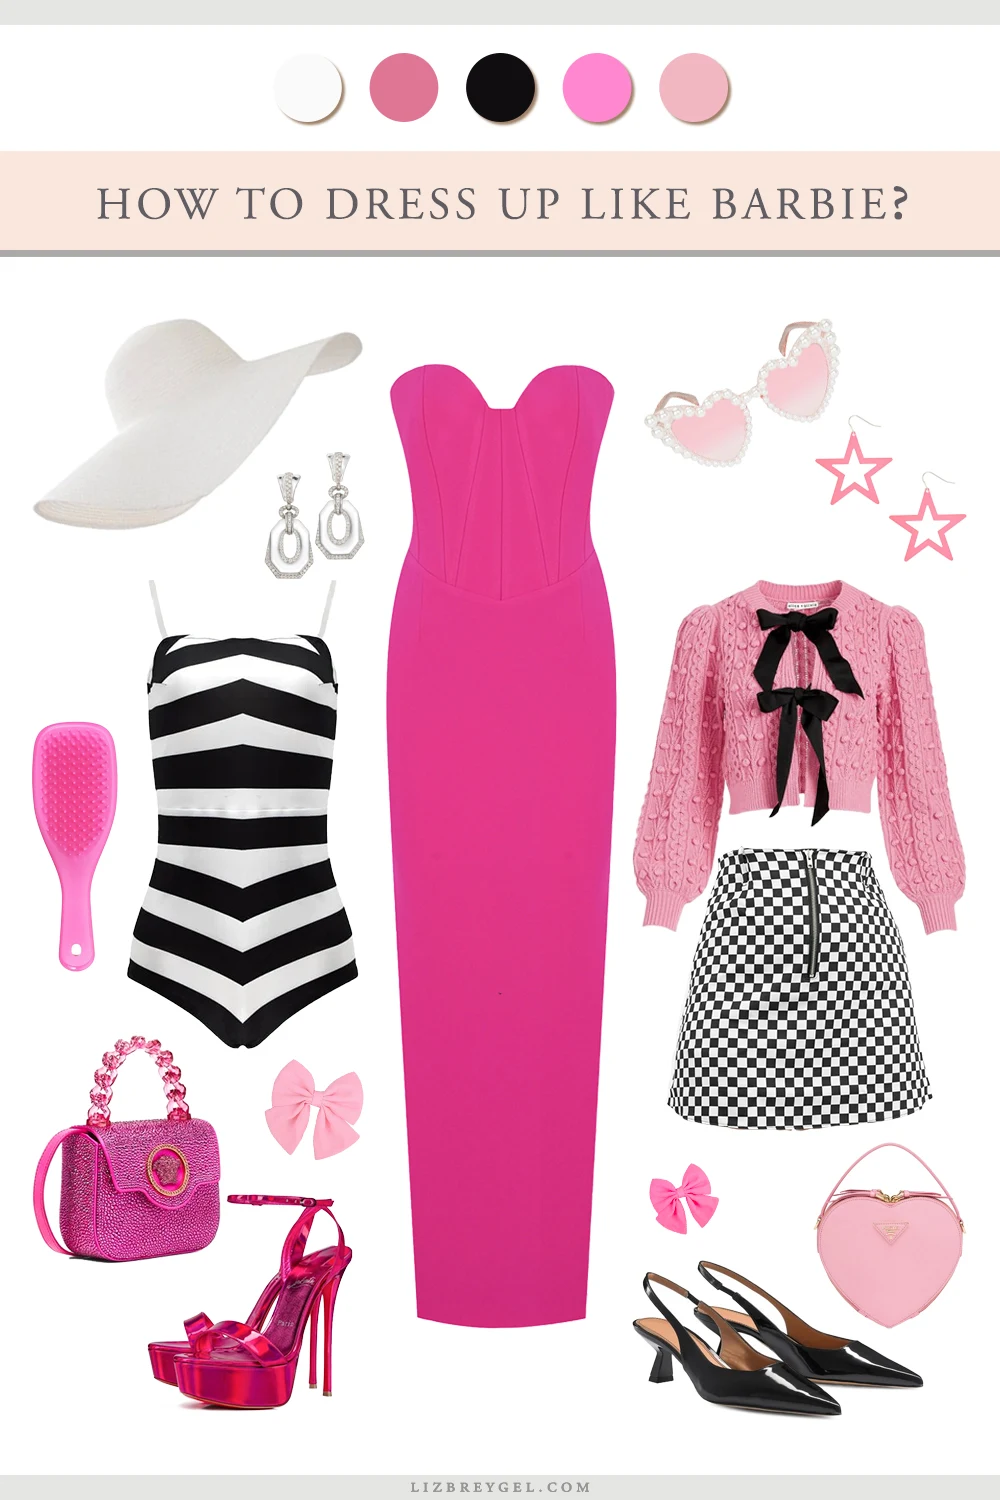 fashion collage with various fashion pieces and accessories inspired by the Barbie doll style